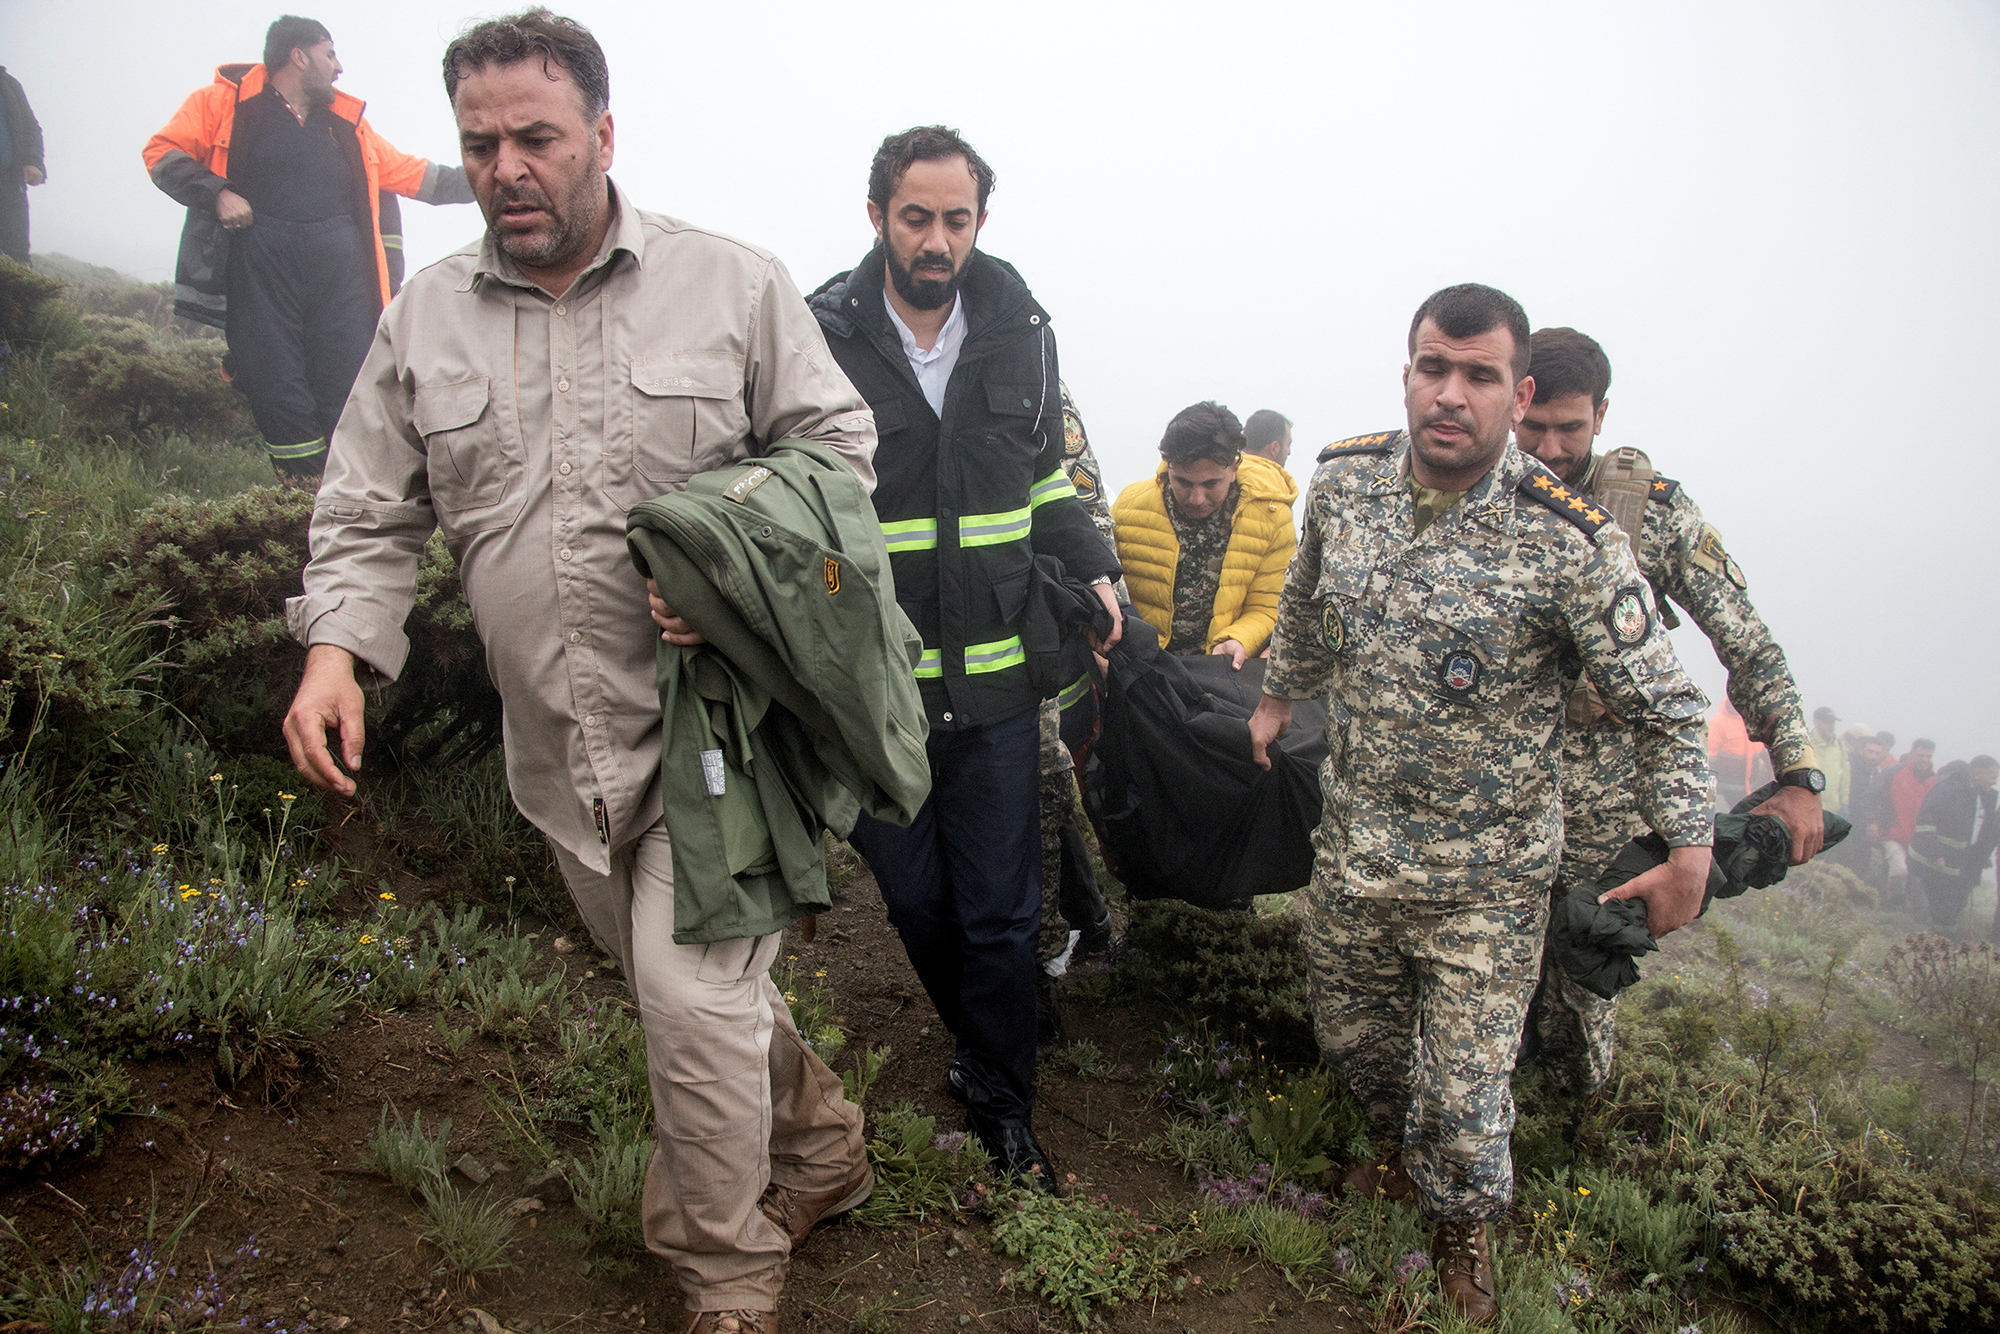 A rescue team carries a body following a helicopter crash carrying Iran's President Ebrahim Raisi, in Varzaqan, Iran, on May 20.